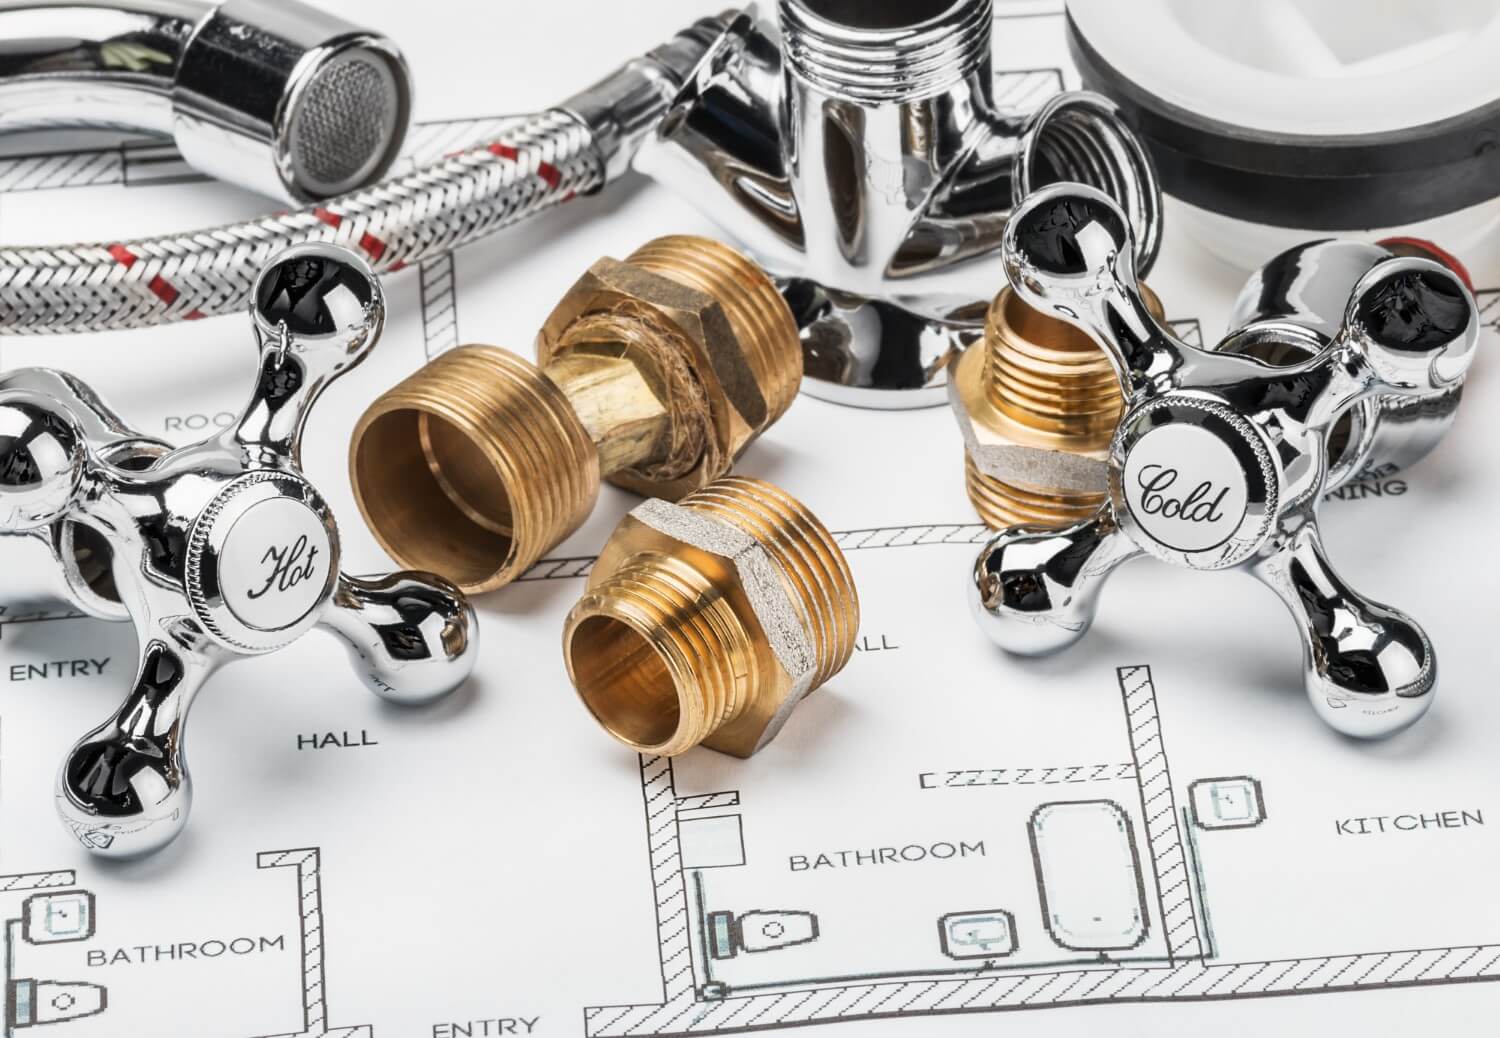 there are multiple benefits to charting your own path in the plumbing industry